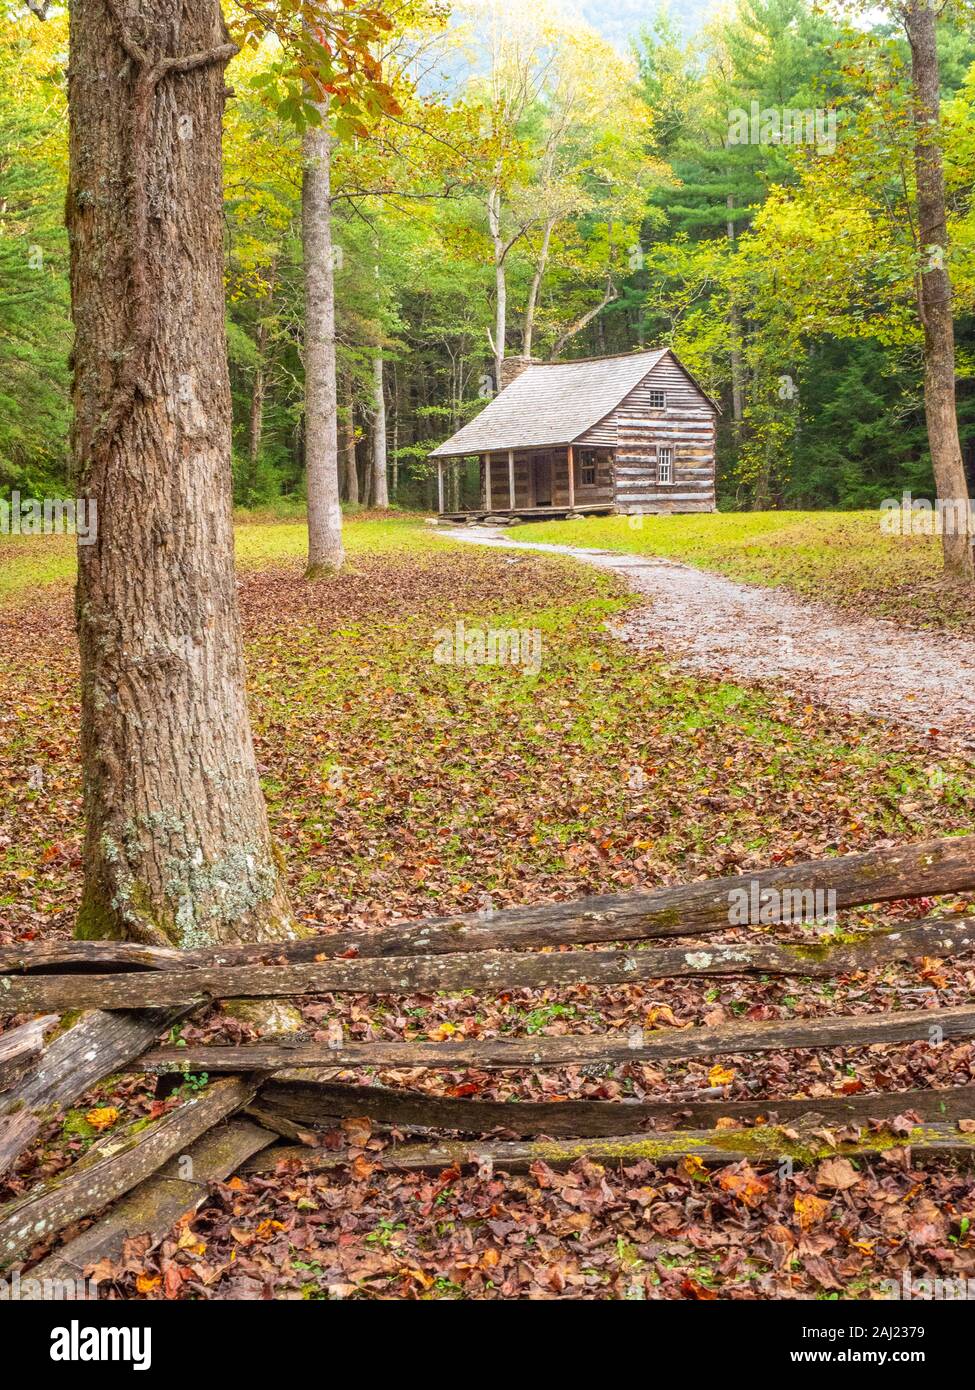 Log cabin, Cades Cove, Great Smoky Mountains National Park, Tennessee, USA, North America Stock Photo